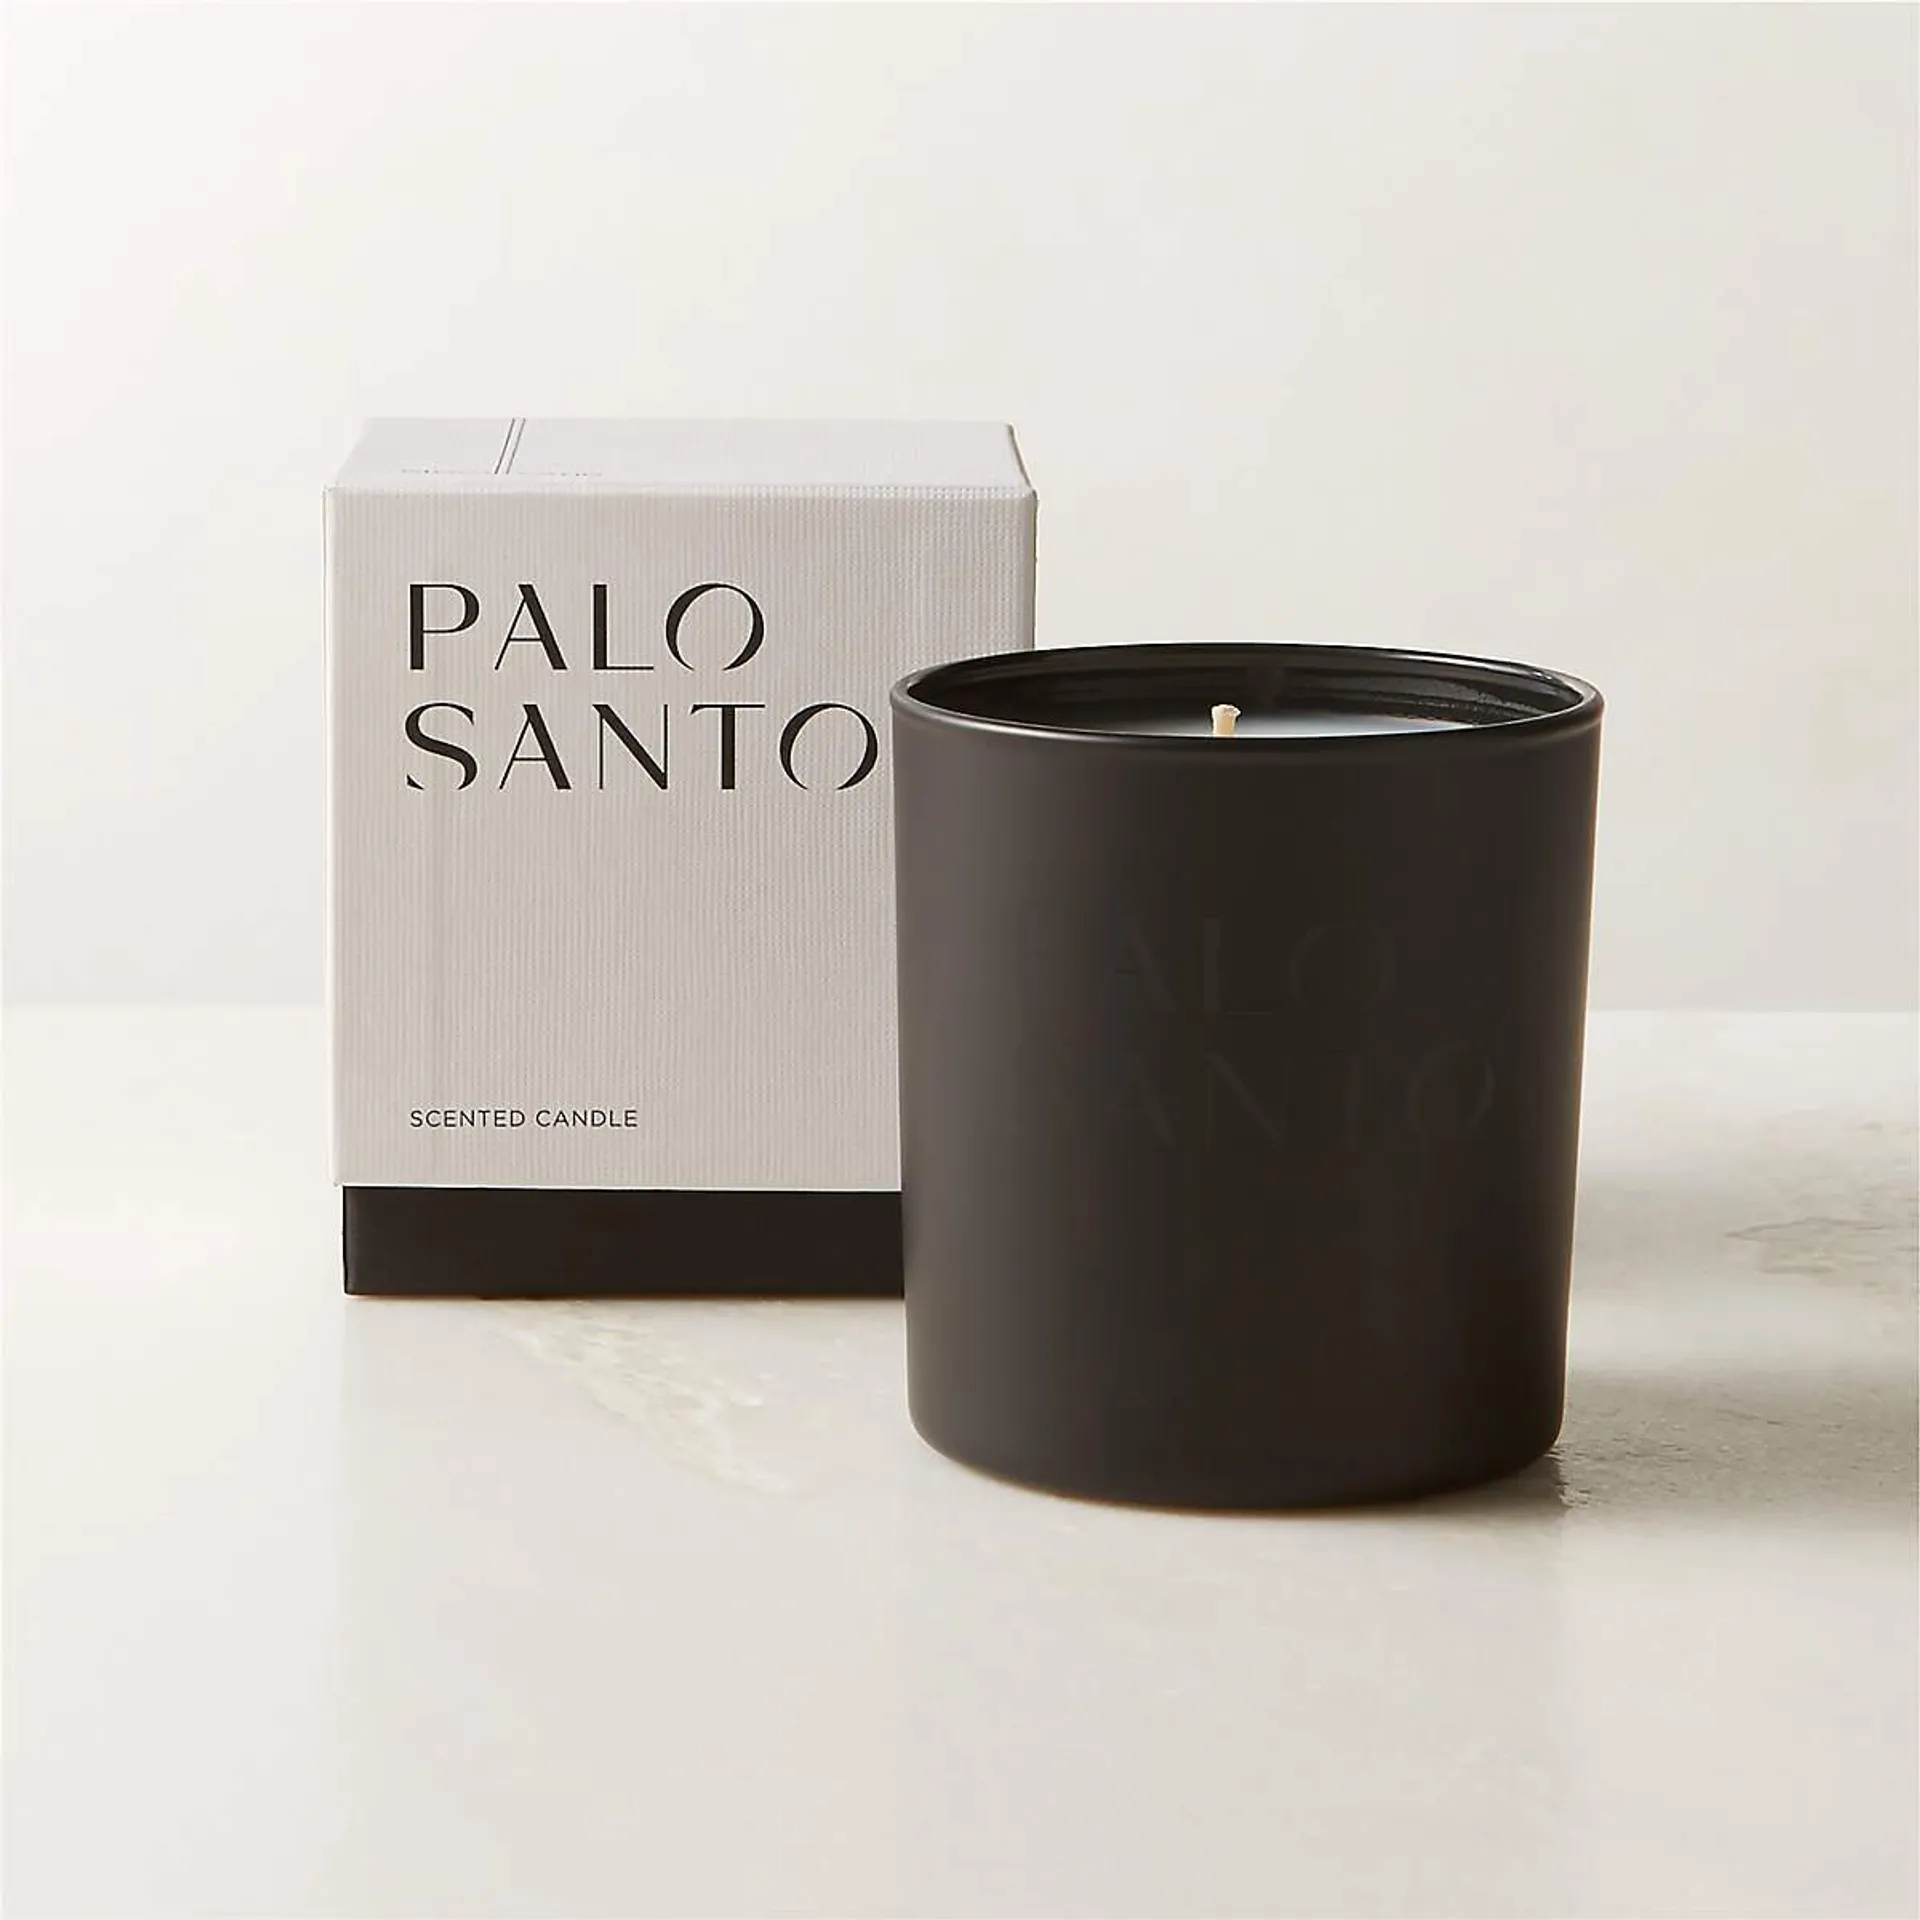 Stockhome Palo Santo Scented Candle 8oz